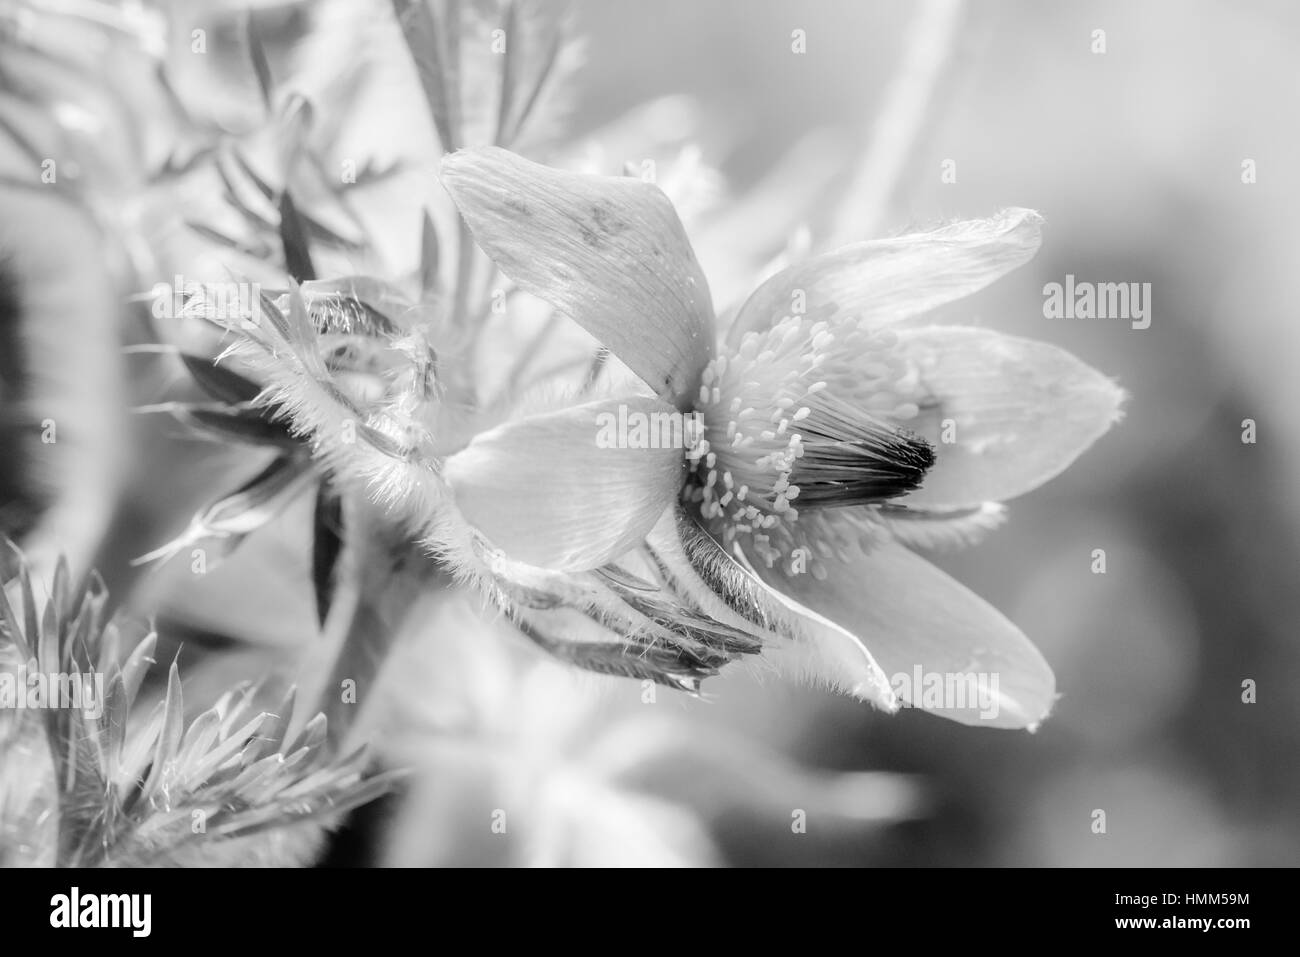 Monochrome pasque flower, fine art outdoor artful portrait of a single bloom in high key black and white Stock Photo